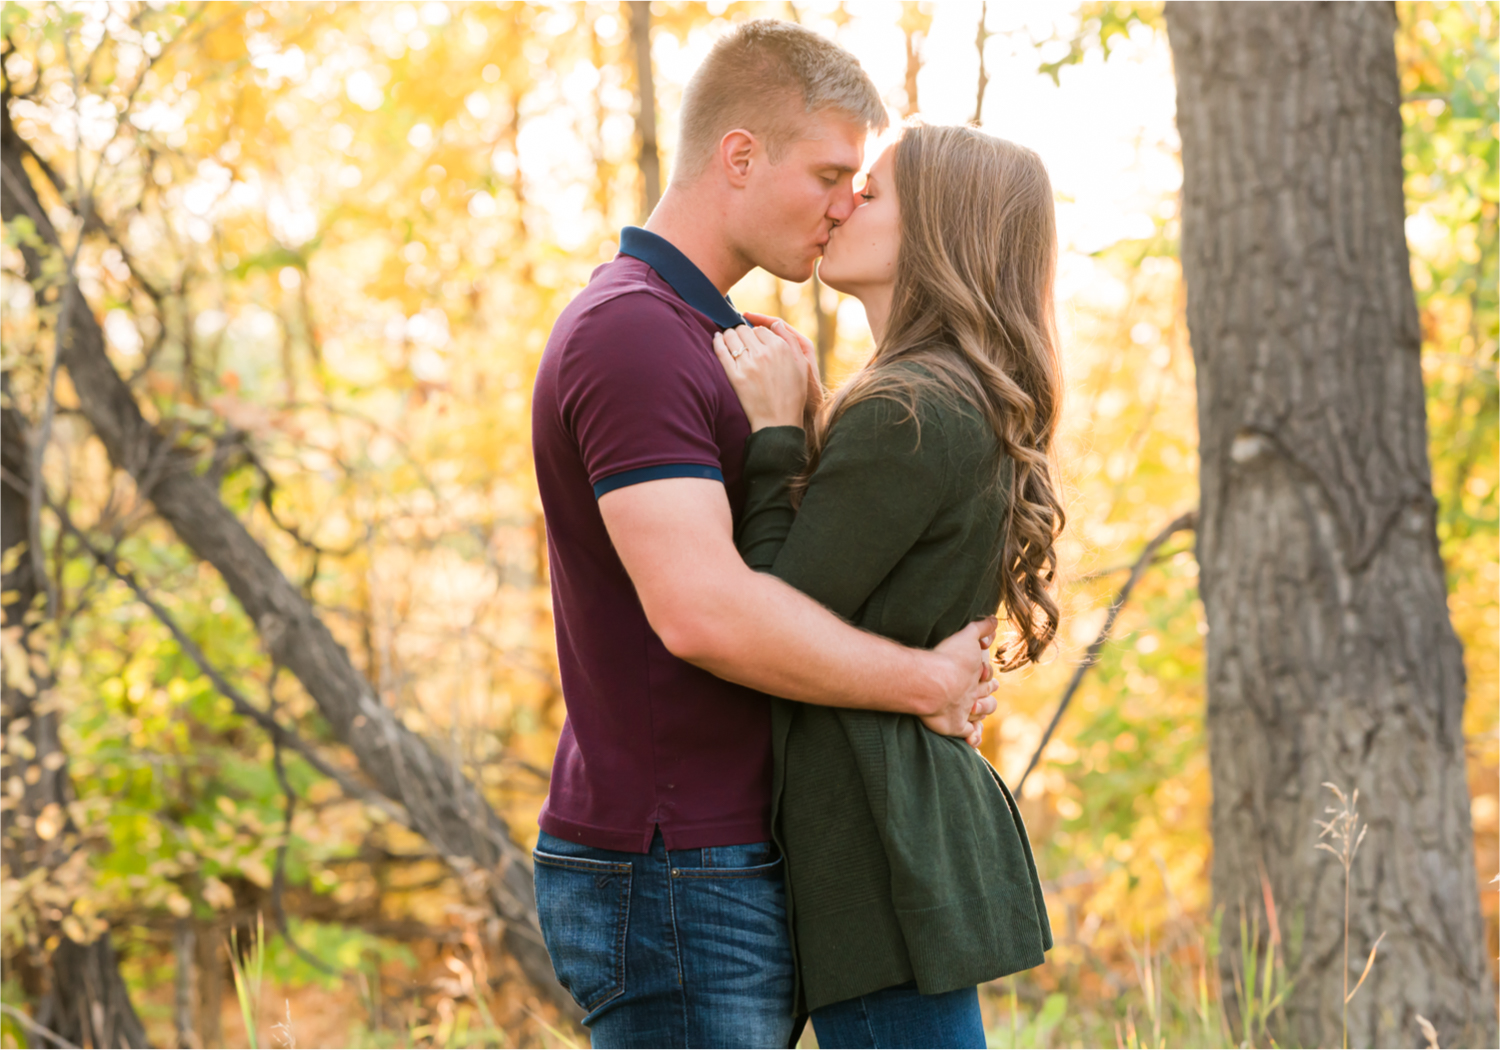 Fall Engagement in Fort Collins Colorado | Britni Girard Photography | Old Town Fort Collins Rooftop Engagement at Sunset